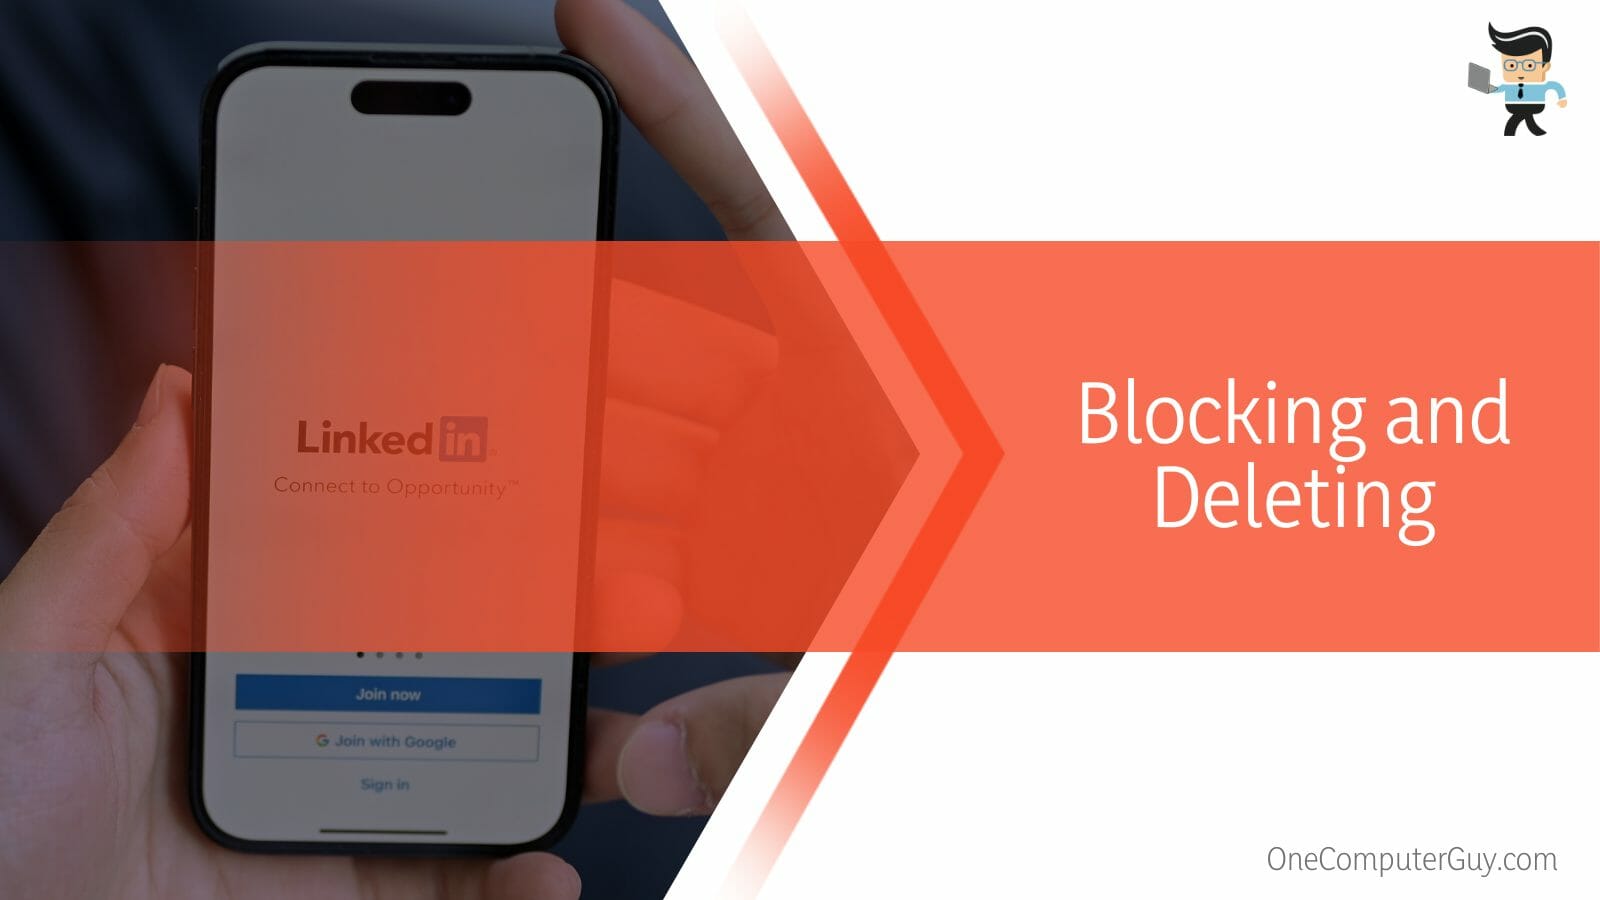 Blocking and Deleting a LinkedIn Contact on Mobile